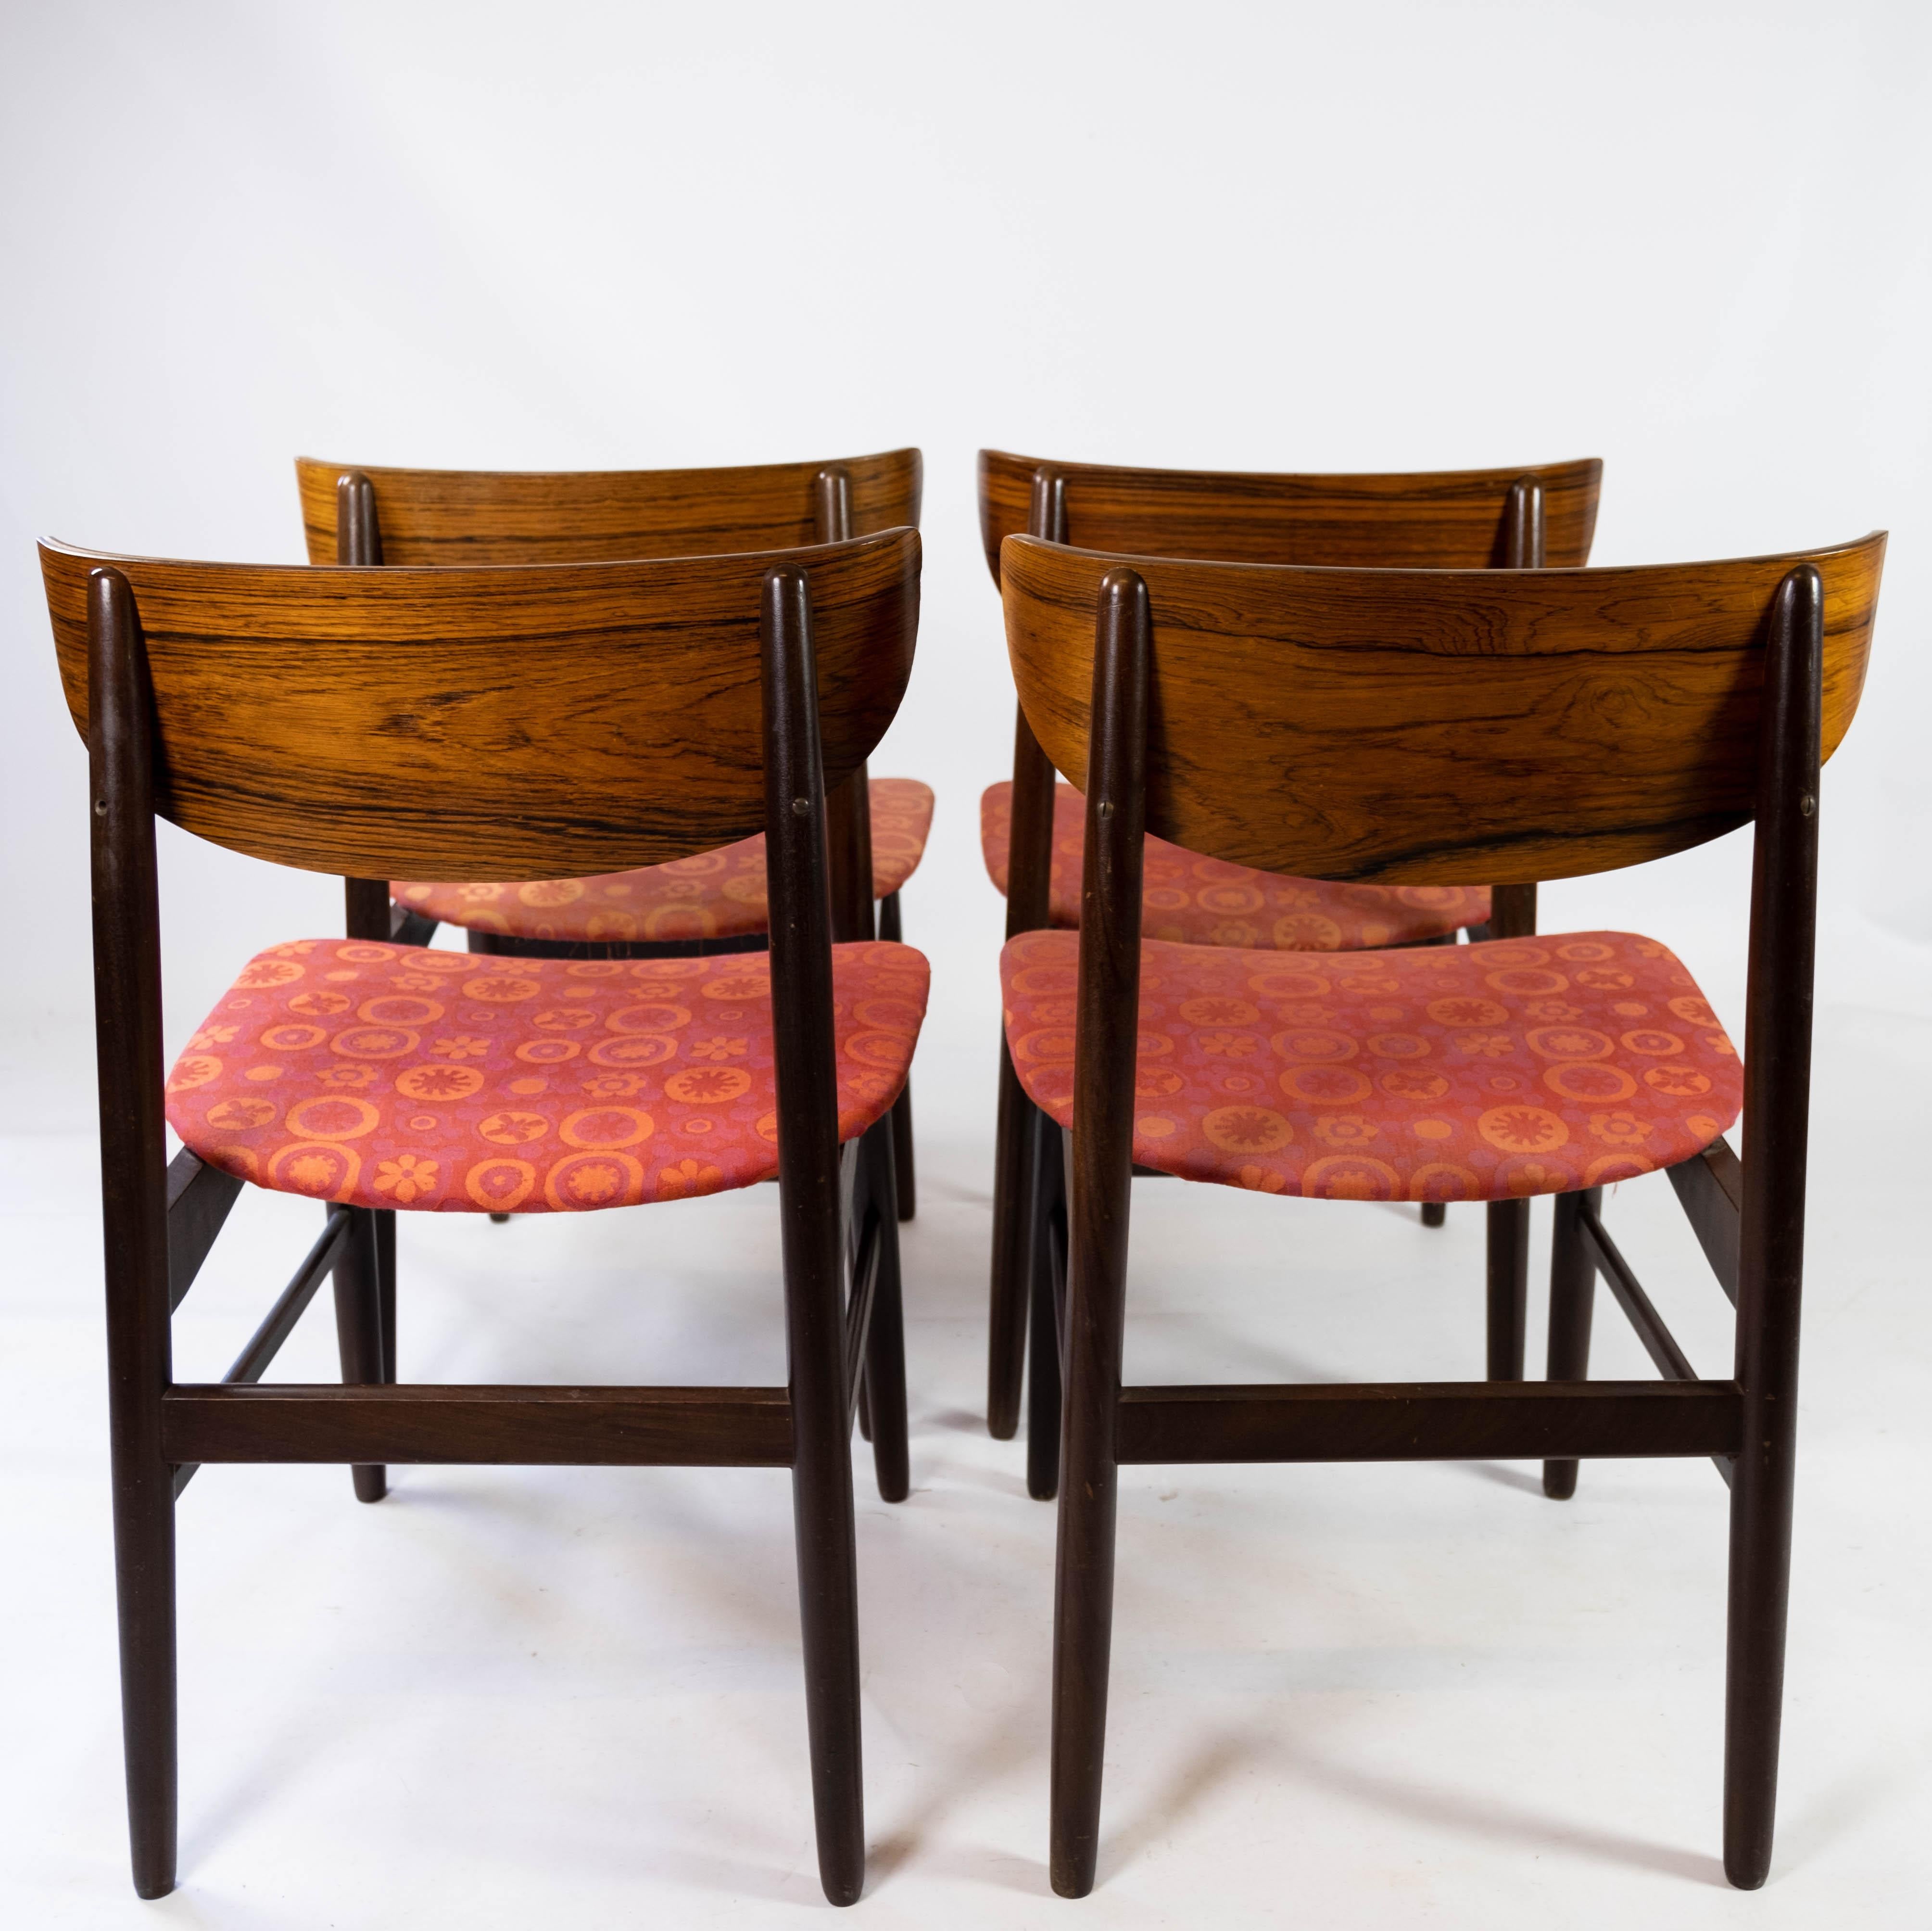 Set of Four Dining Room Chairs in Rosewood, of Danish Design, 1960s For Sale 1